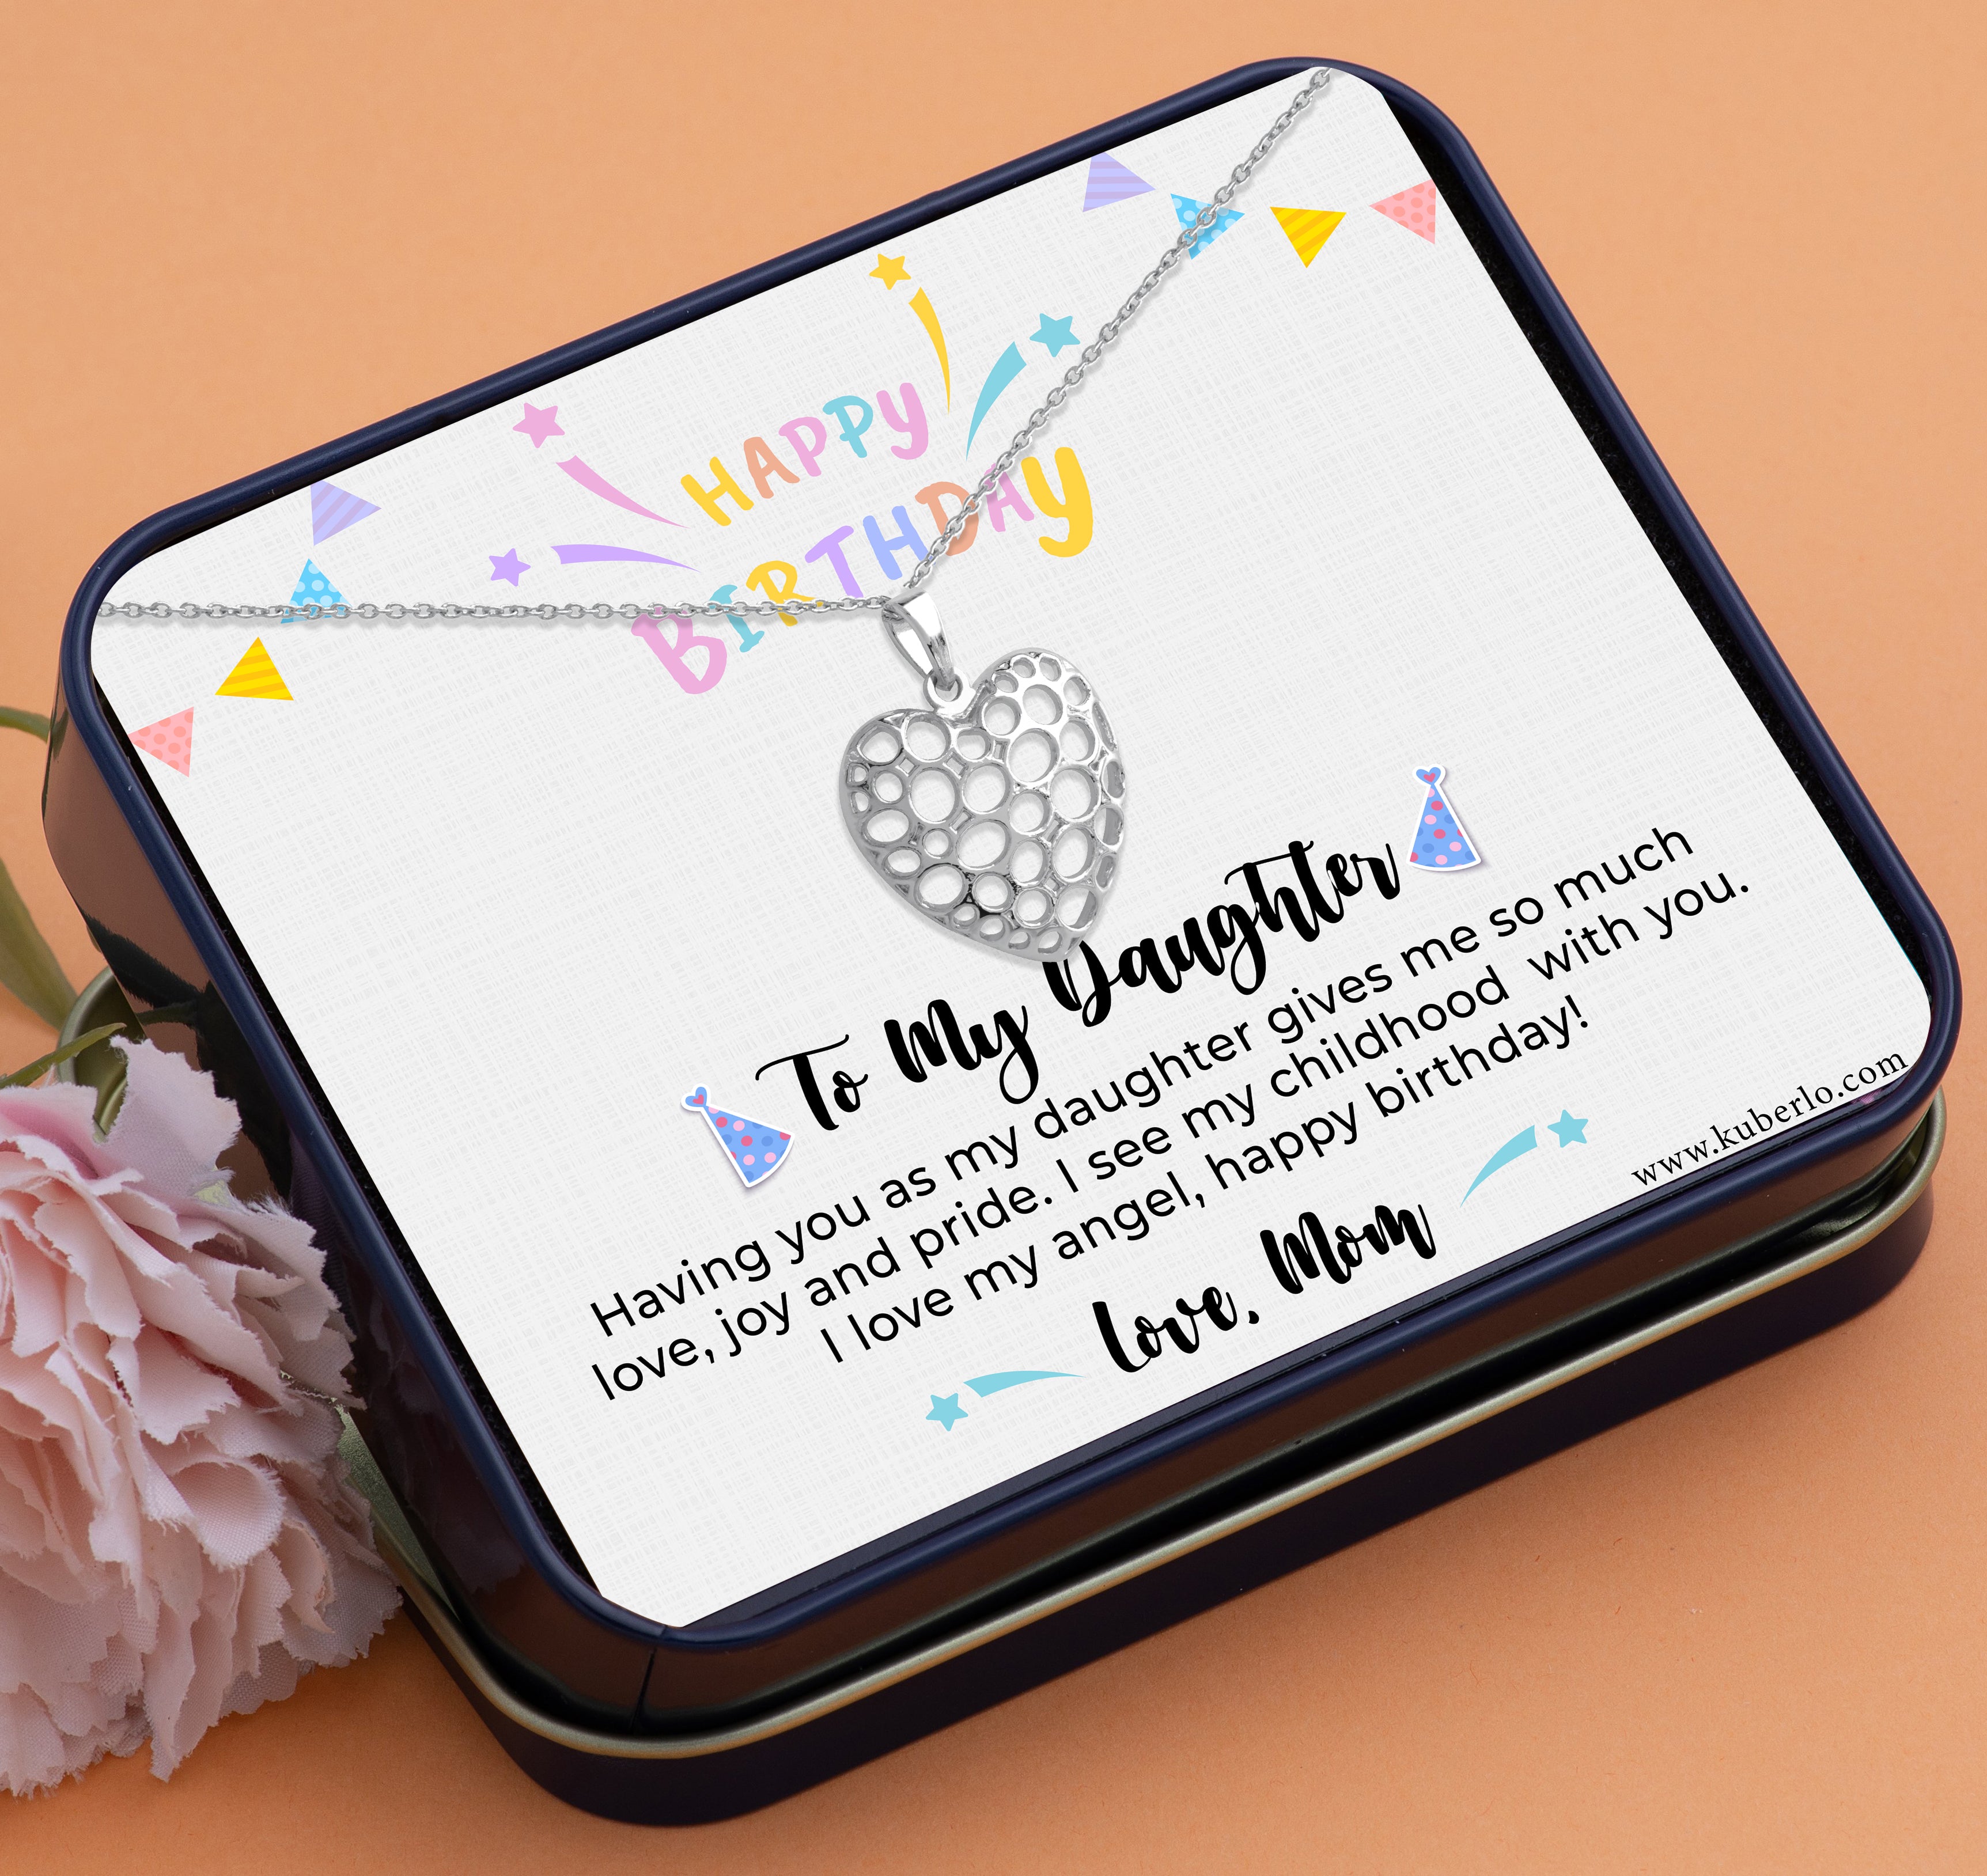 25th Birthday YouAreBeautifulBox. Care Package for Daughter. Friend Gift —  YouAreBeautifulBox | 25th birthday gifts, Happy 25th birthday, 25th birthday